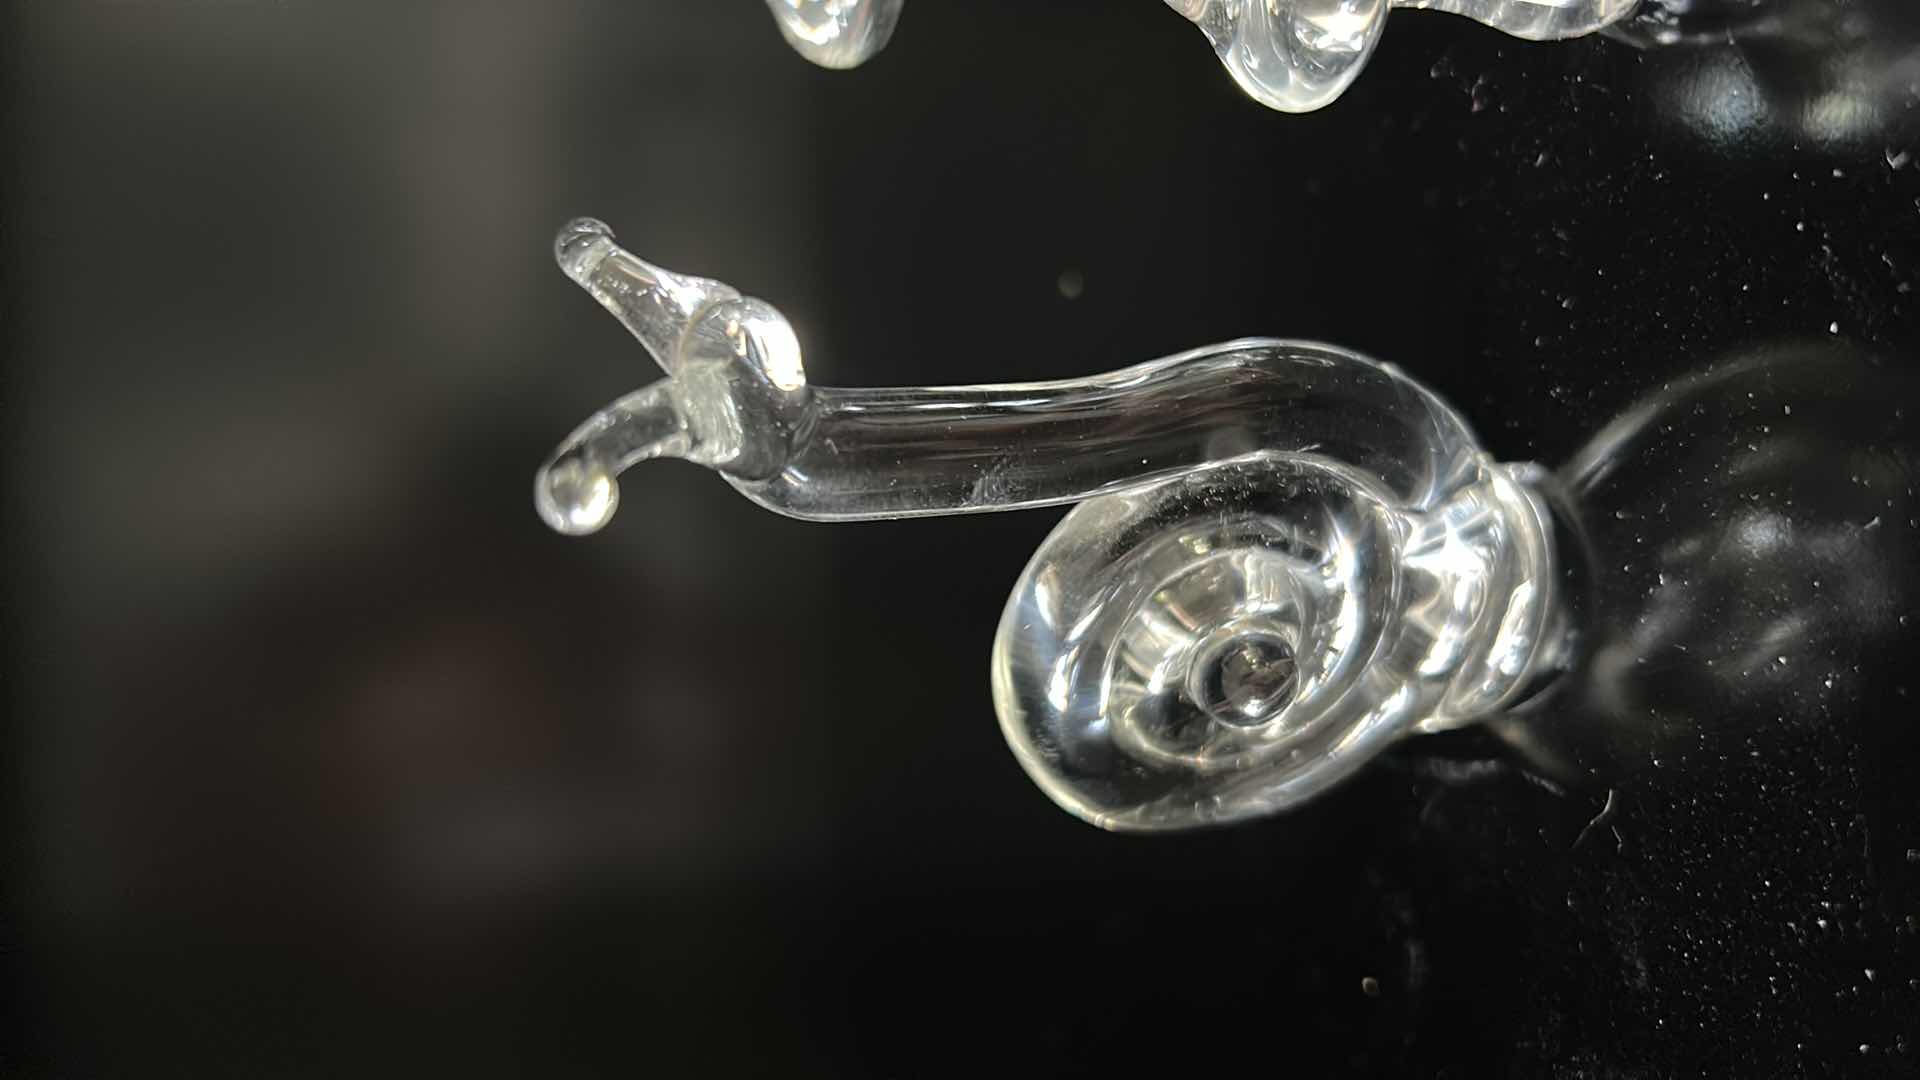 Photo 2 of HAND BLOWN GLASS FIGURINES SNAILS AND MUSHROOMS TALLEST 3.5”